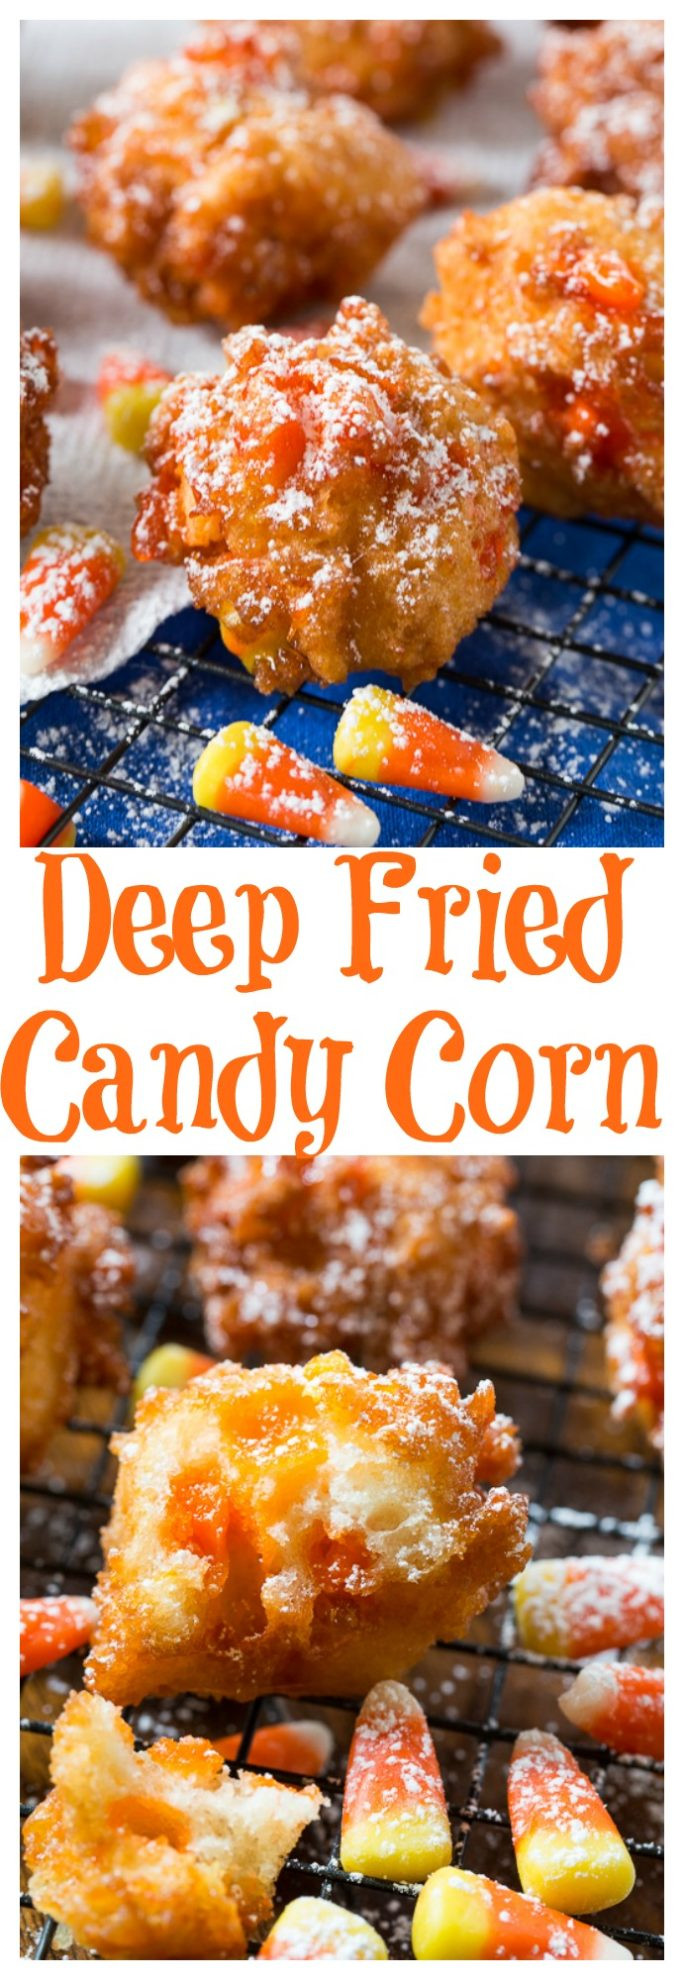 Deep Fried Corn
 Deep Fried Candy Corn Spicy Southern Kitchen